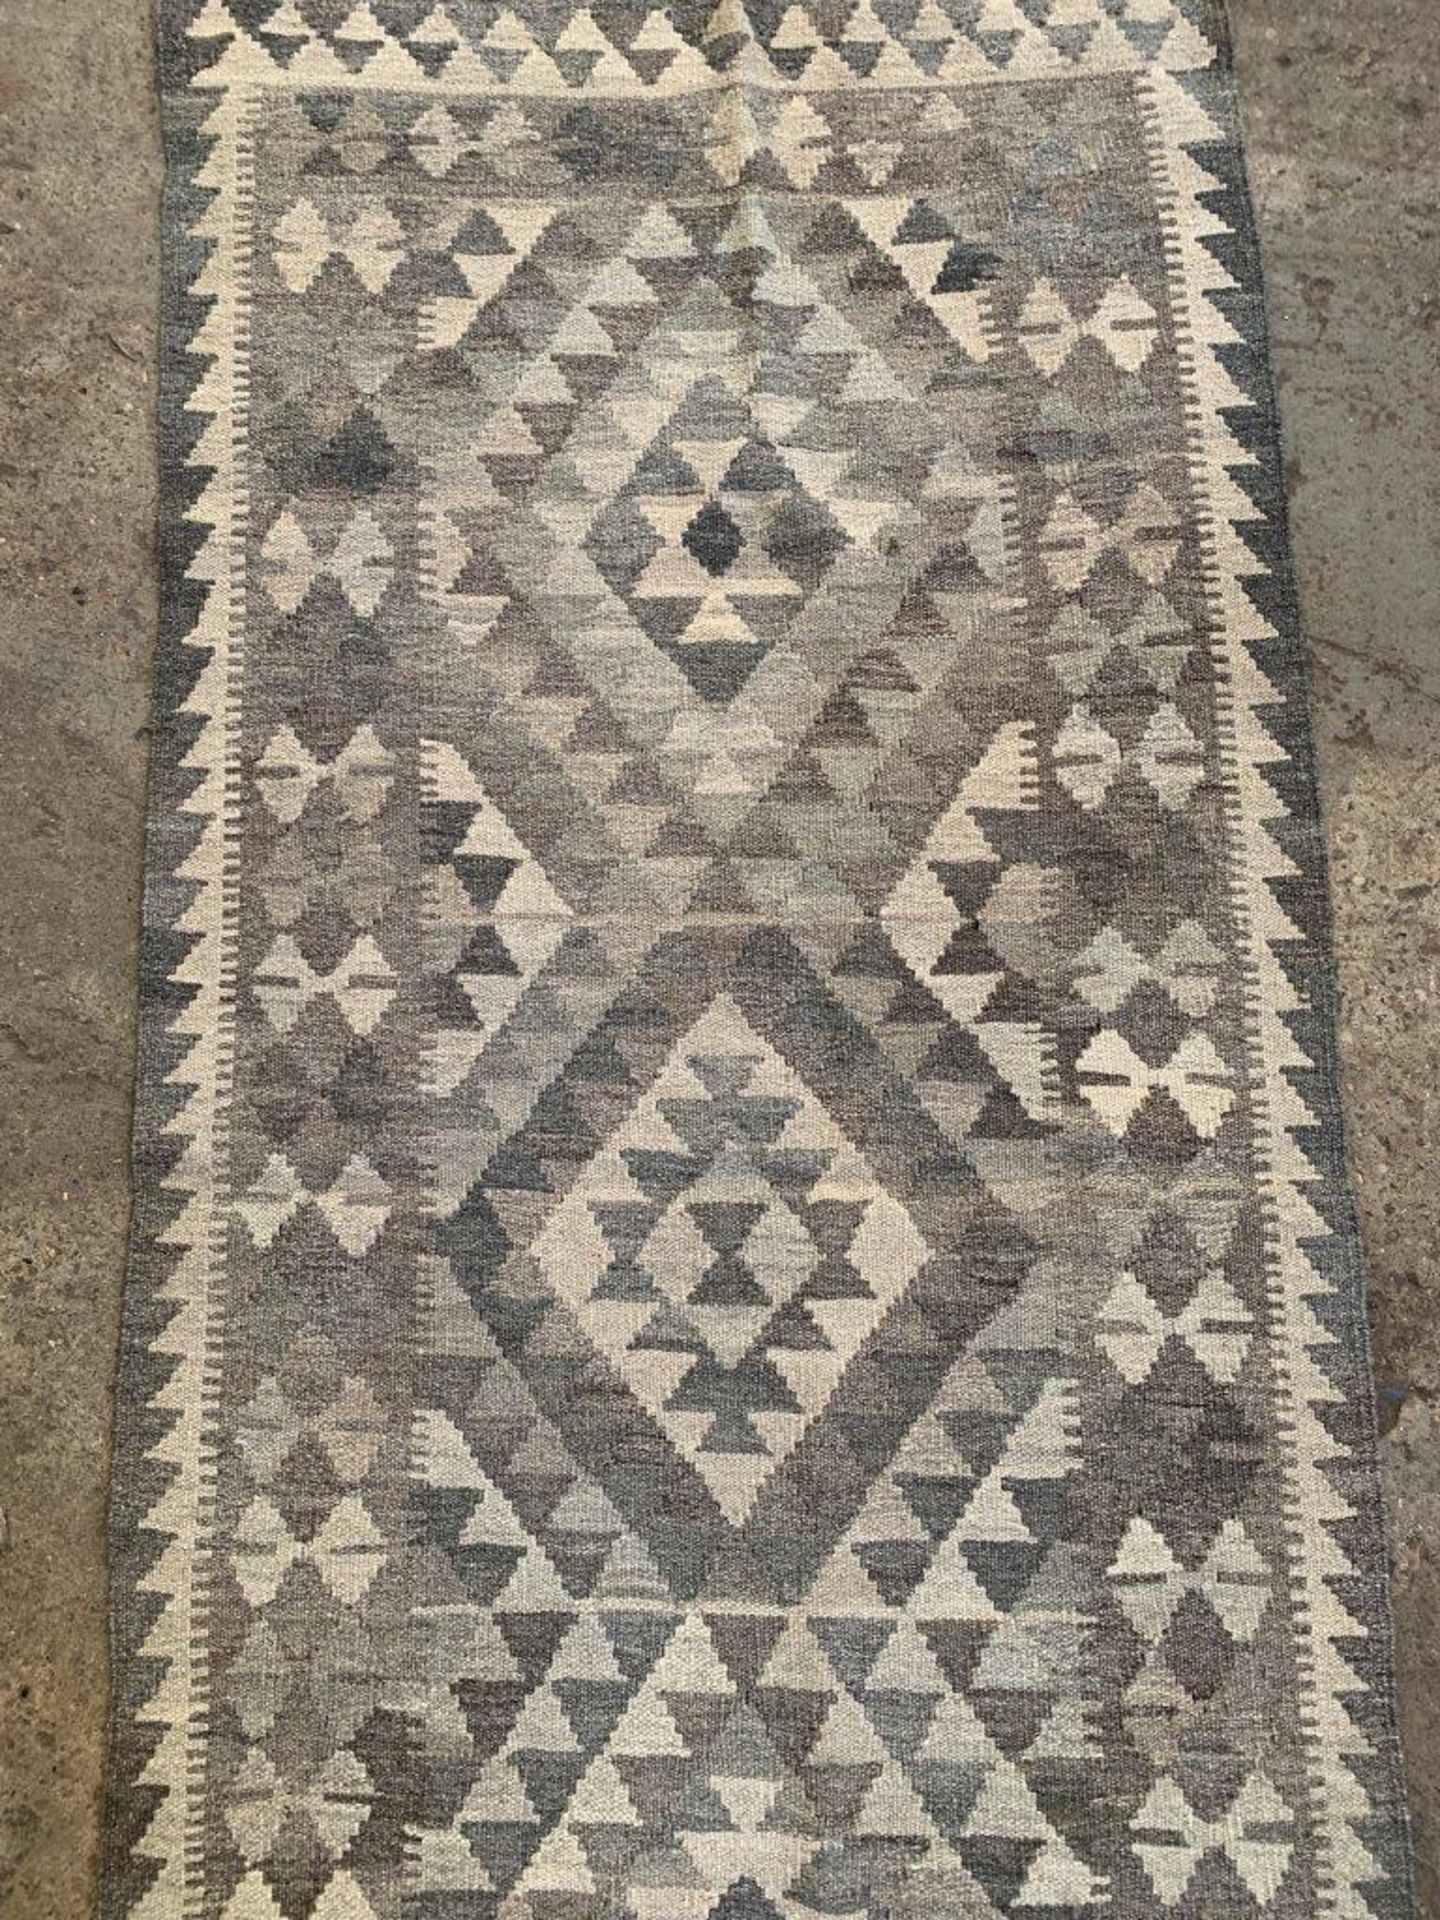 Two grey rugs - Image 5 of 6